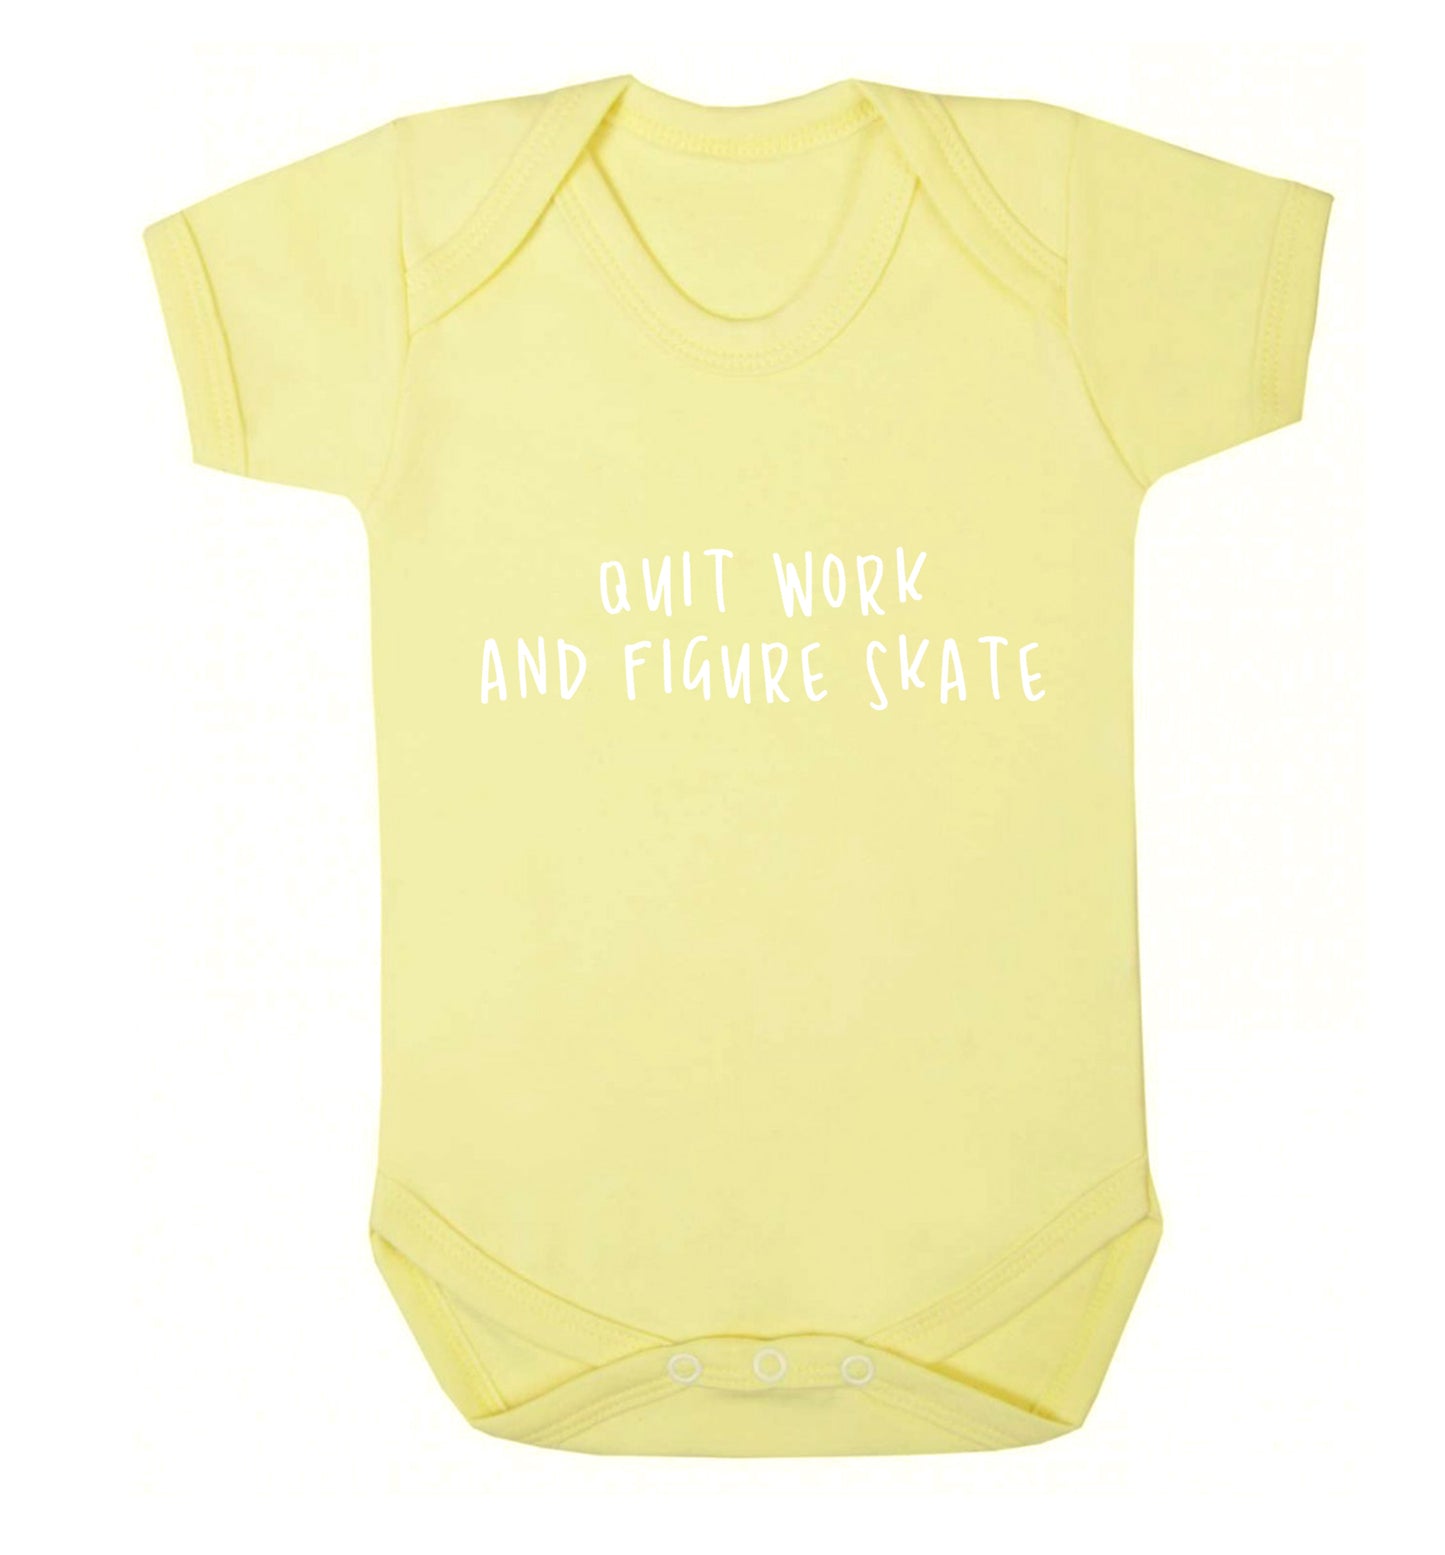 Quit work figure skate Baby Vest pale yellow 18-24 months